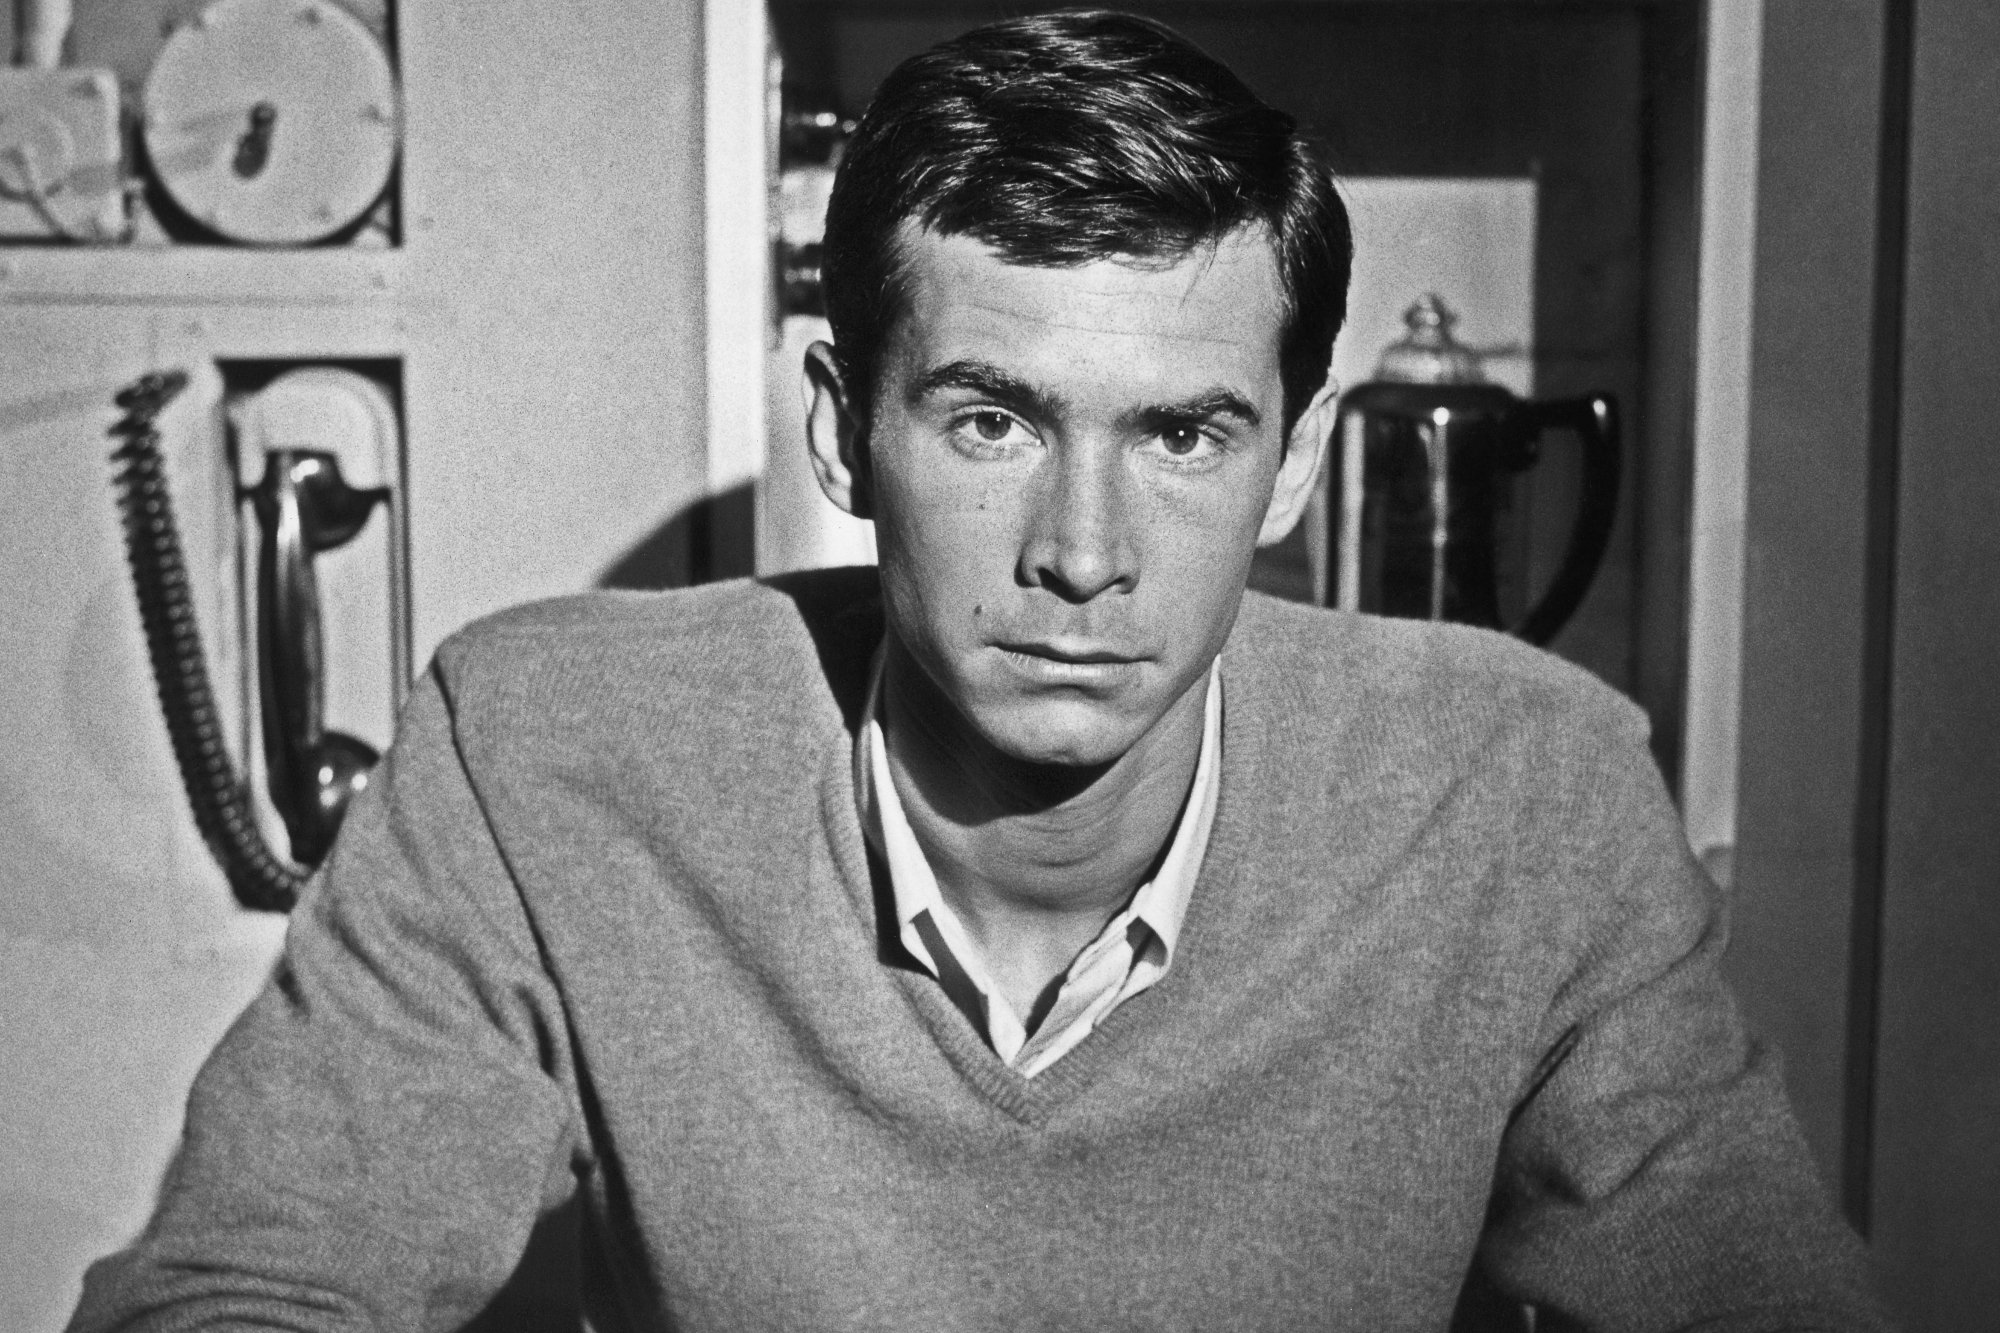 'Saturday Night Live' host Anthony Perkins wearing a sweater and collared shirt underneath with a serious look on his face.